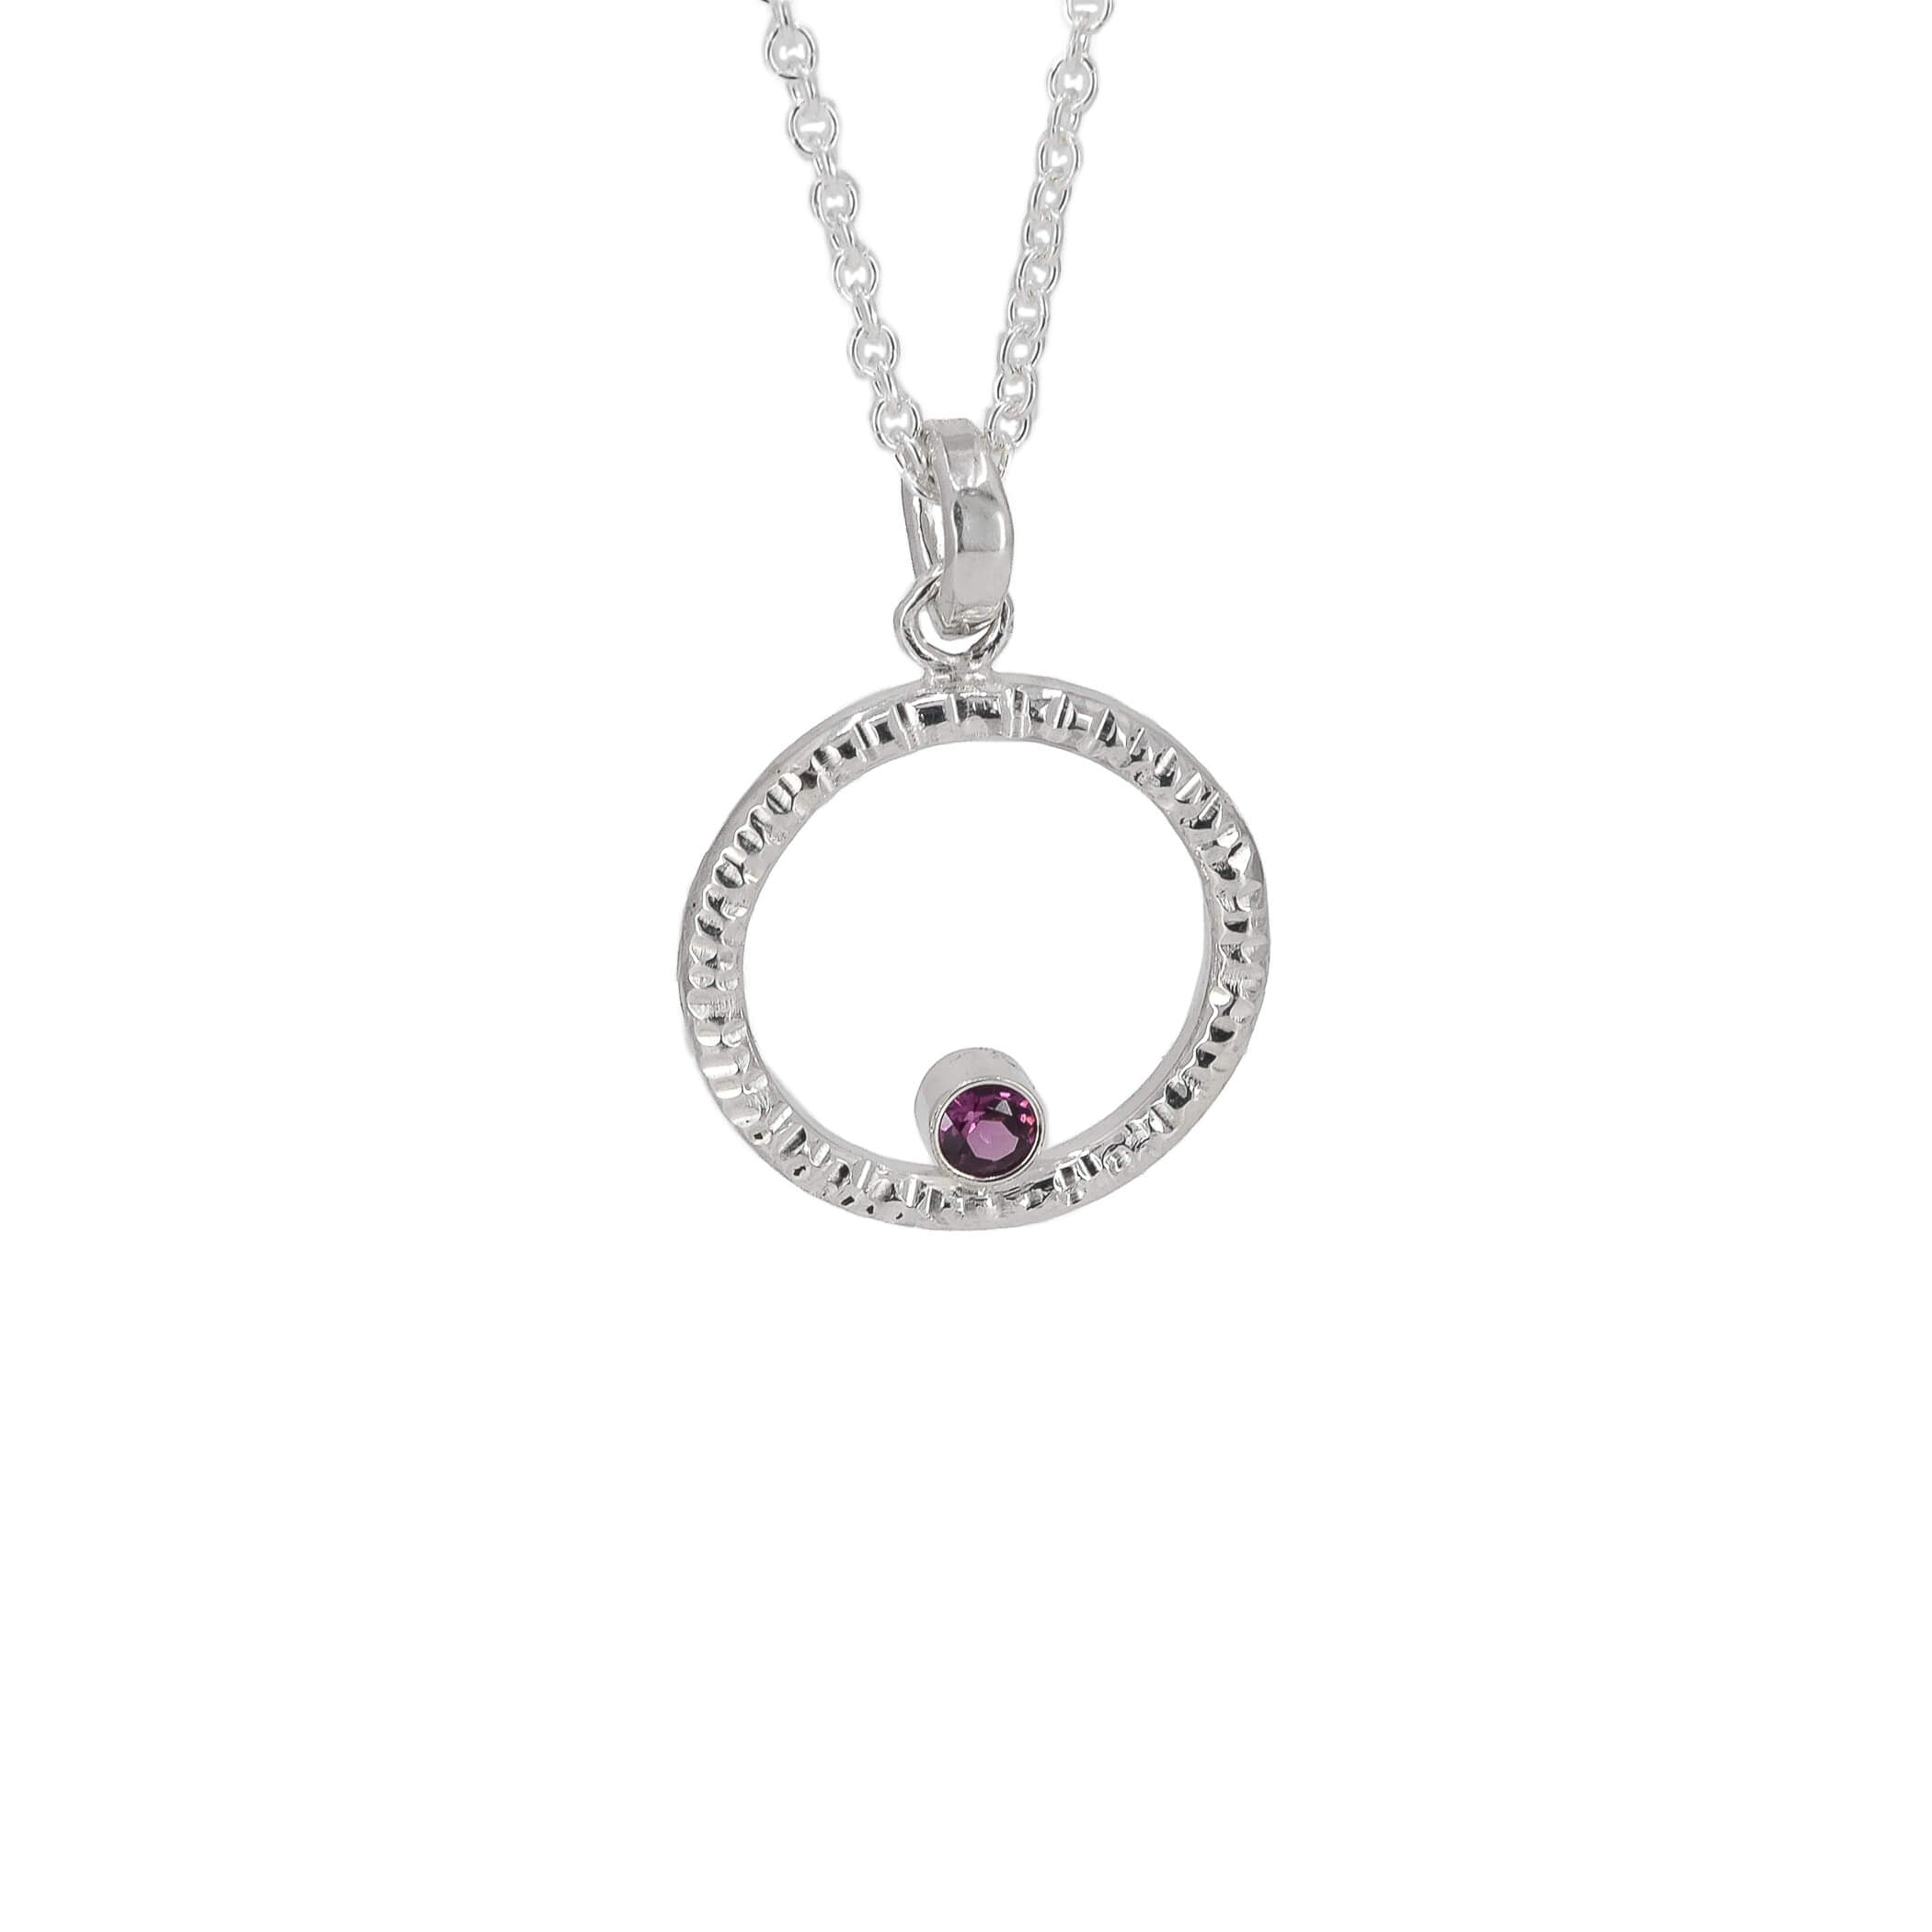 Circle of life pendant necklace in sterling silver with textured edges, featuring a rhodolite garnet faceted stone